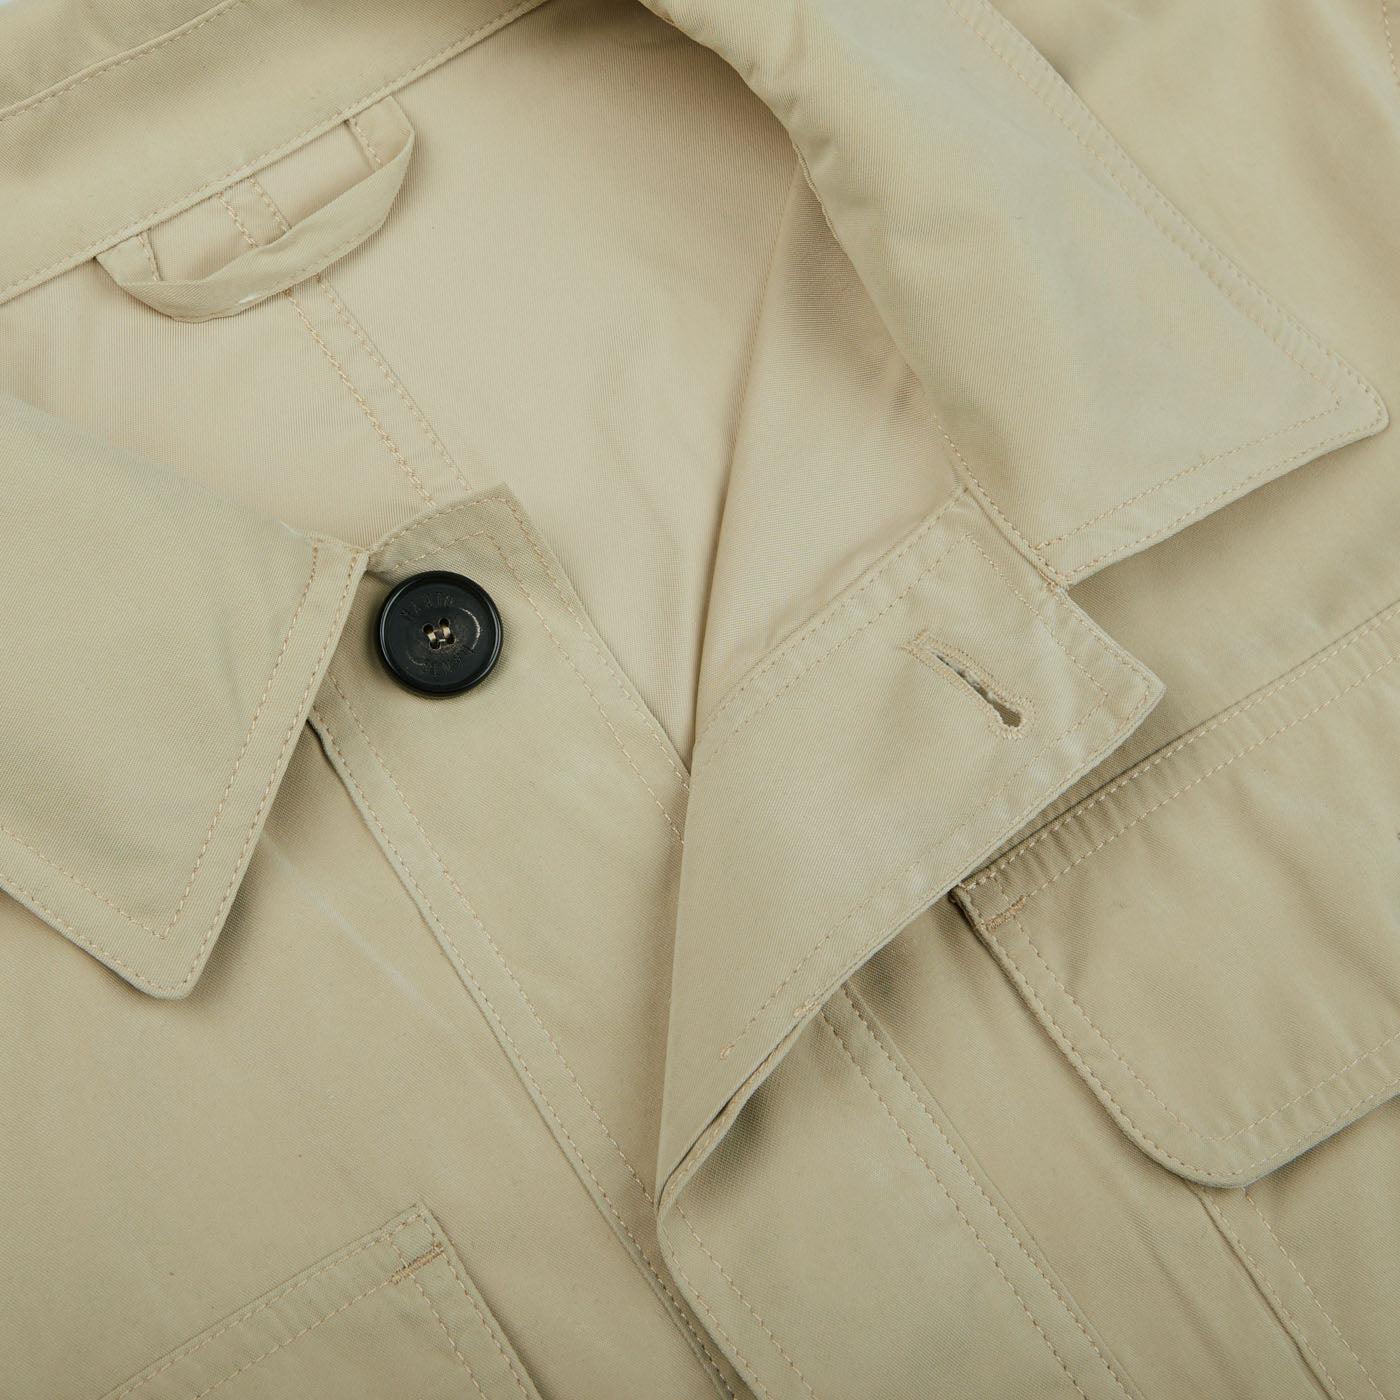 A close-up of a Khaki Beige Ultrafine Microfiber Safari Jacket with buttons, made by Manto.